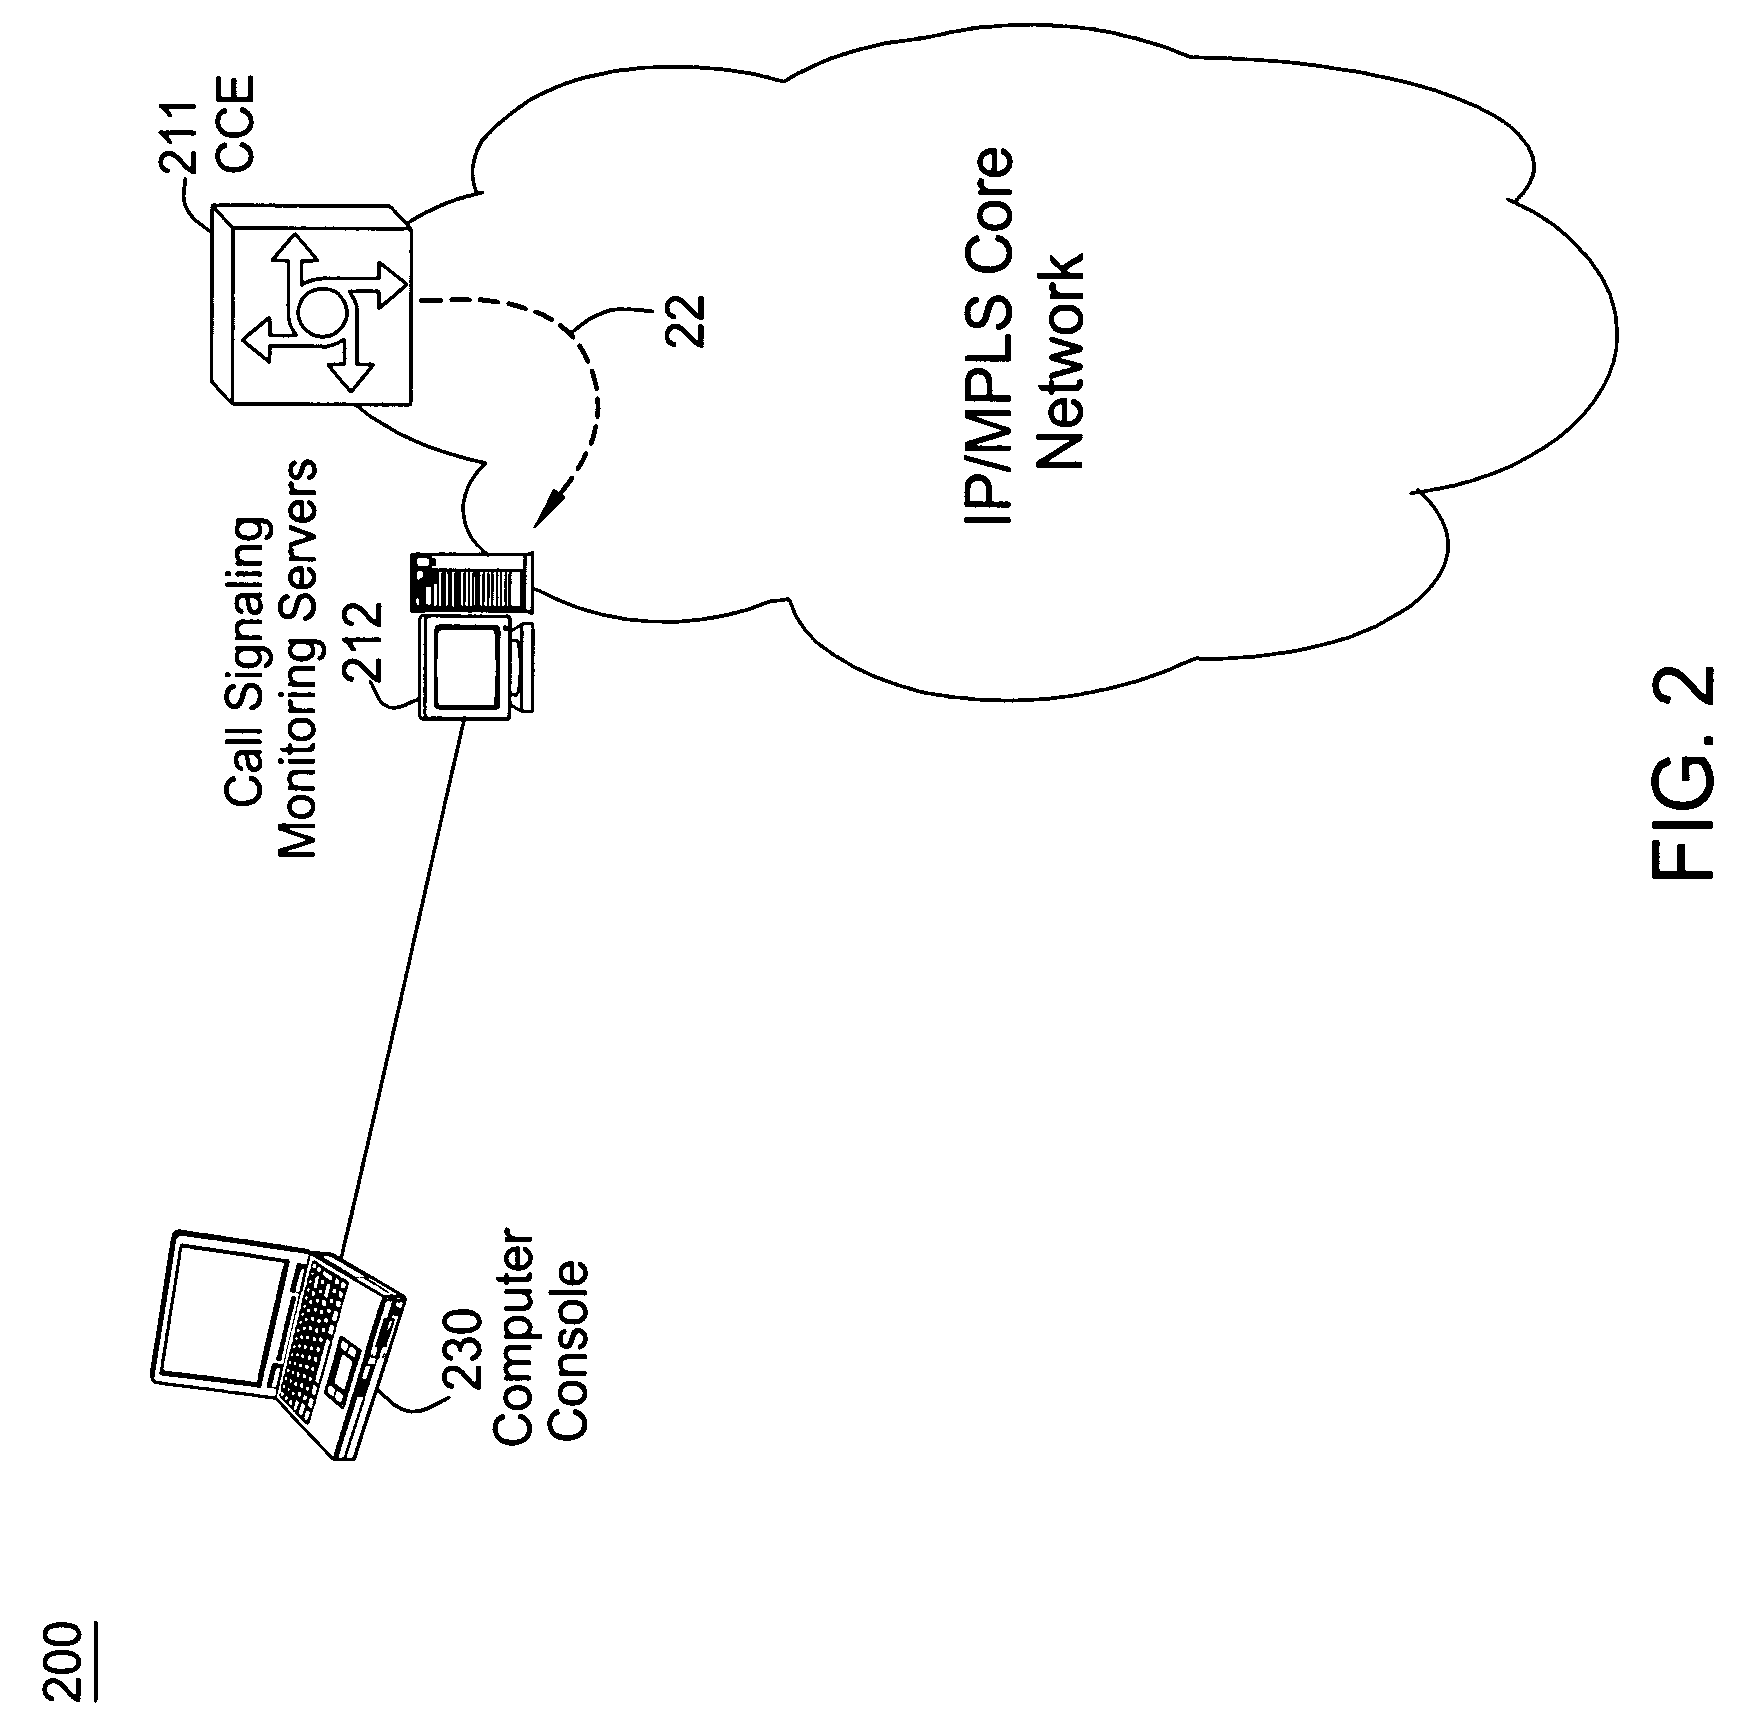 Method and apparatus for automating the detection and clearance of congestion in a communication network